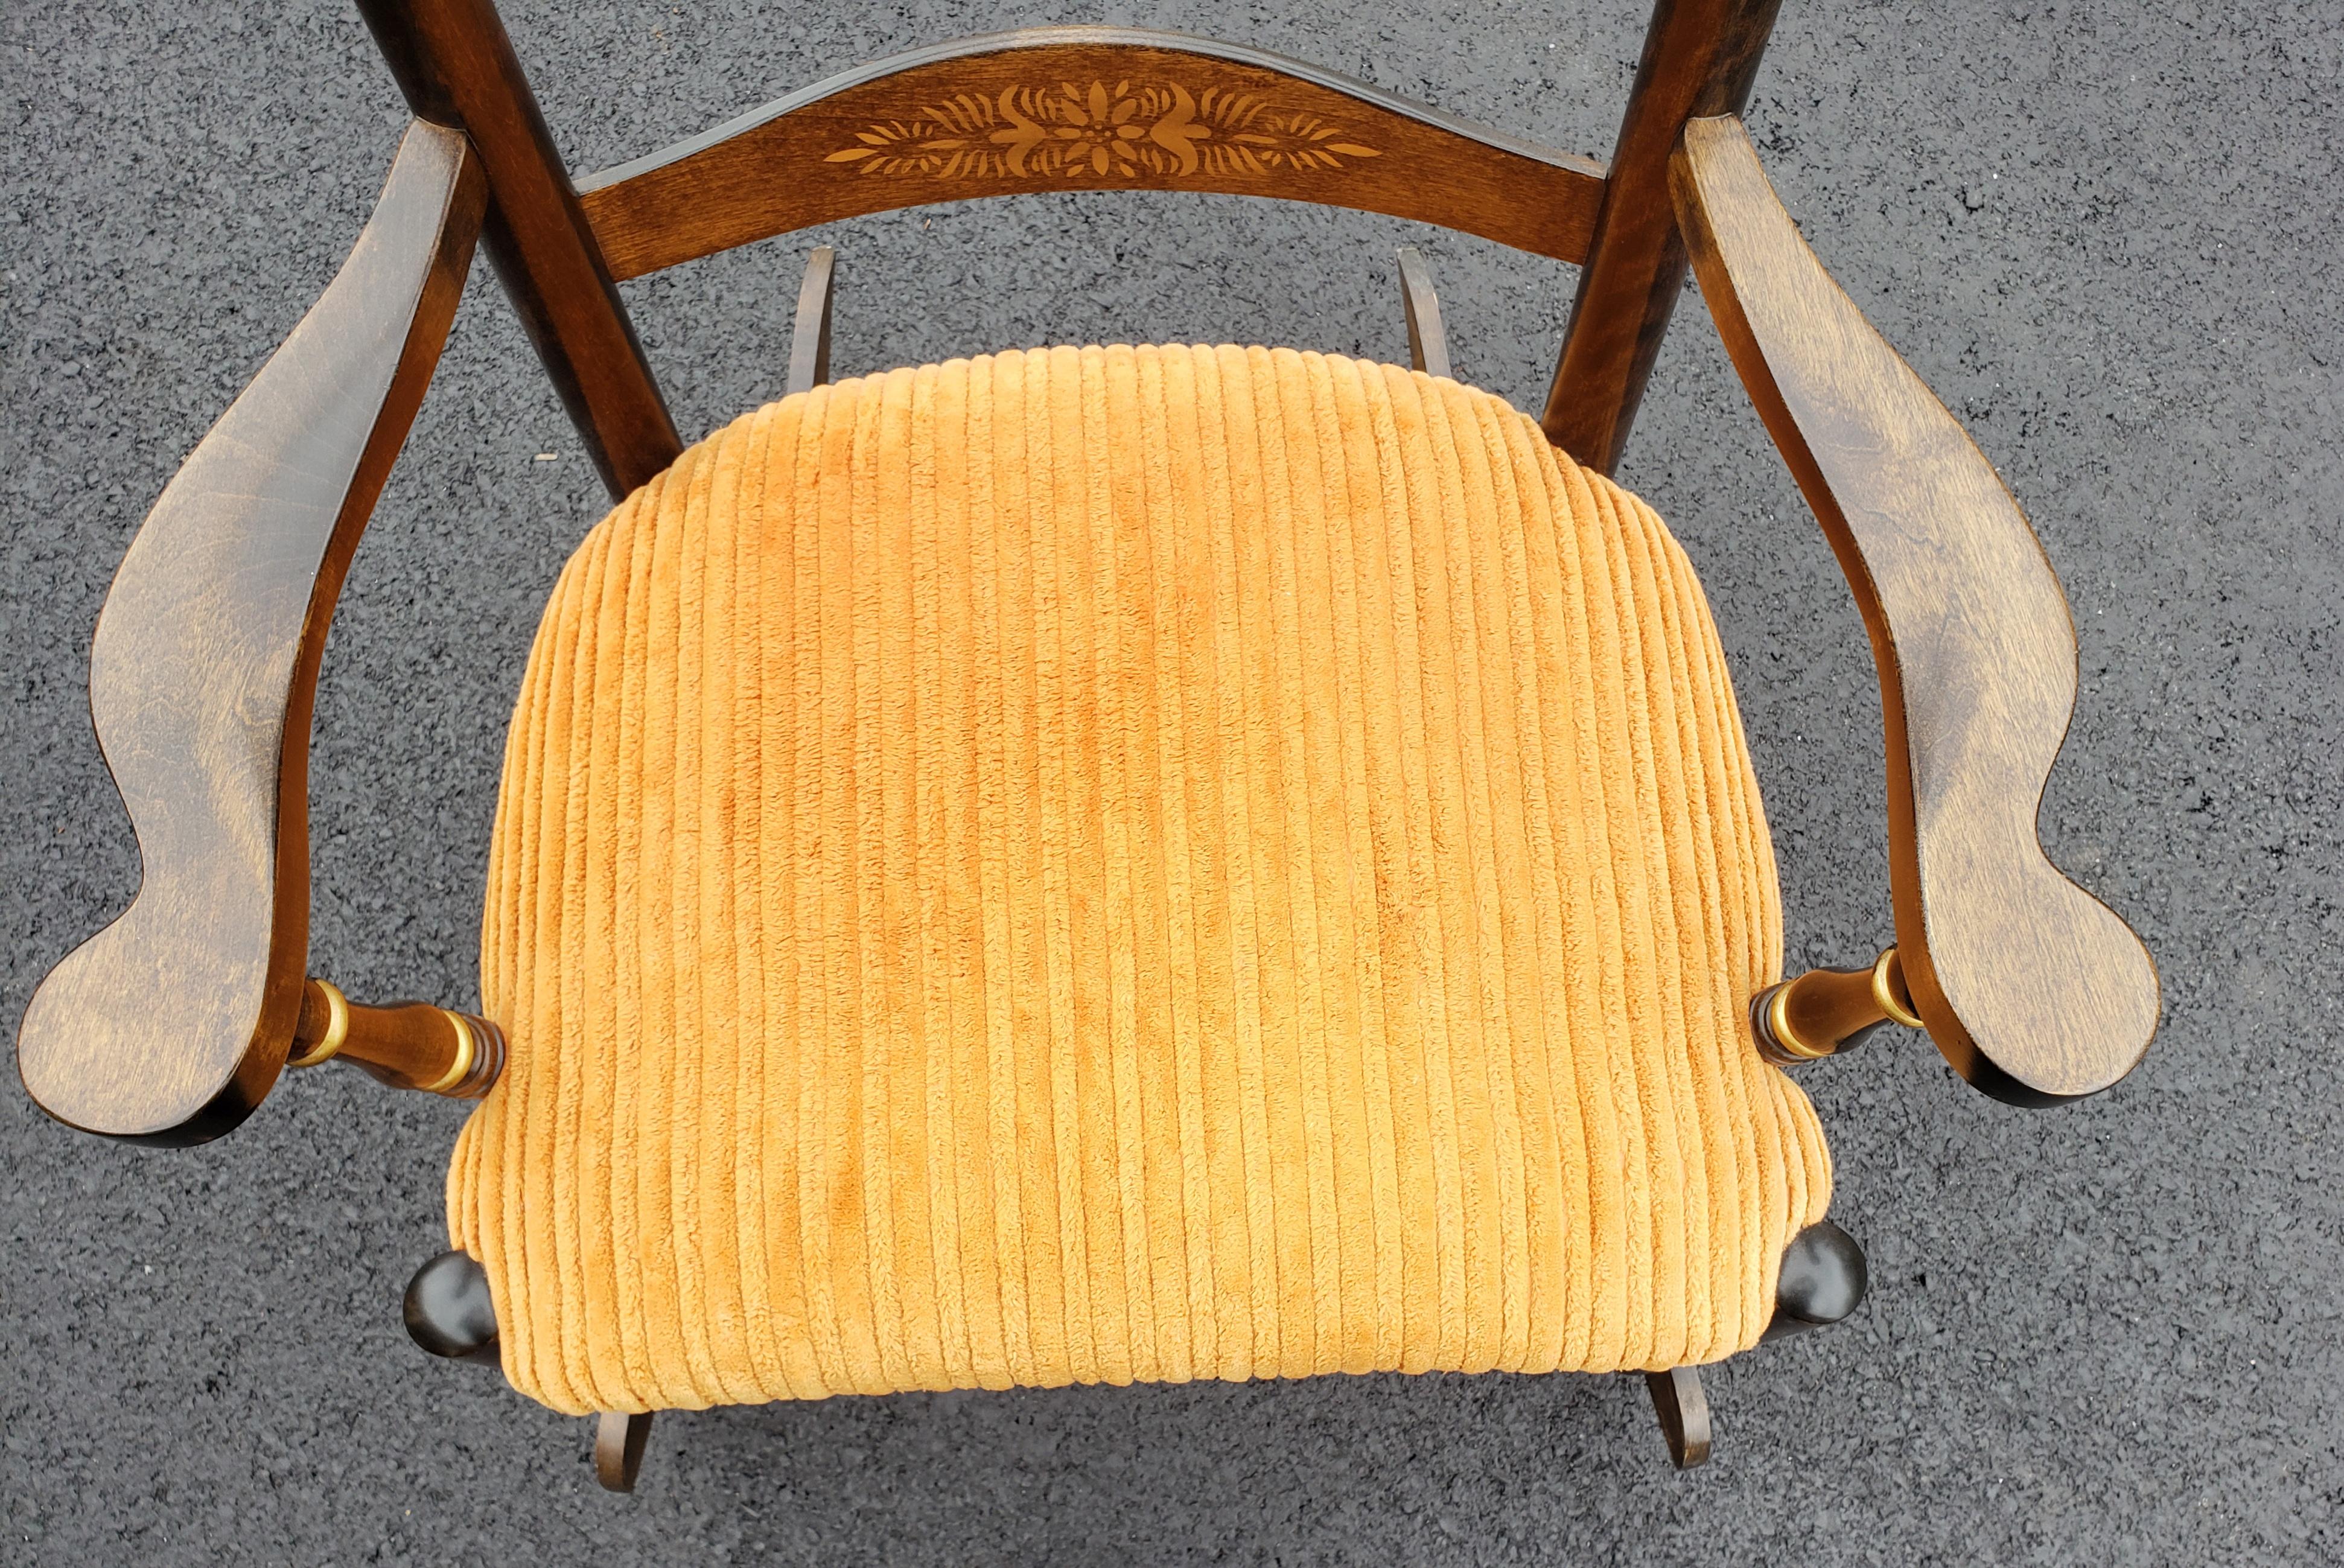 Hand-Crafted Nichols & Stone Hitchcock Style Rocking Chair in Honor of U.S. Gen. Thayer For Sale